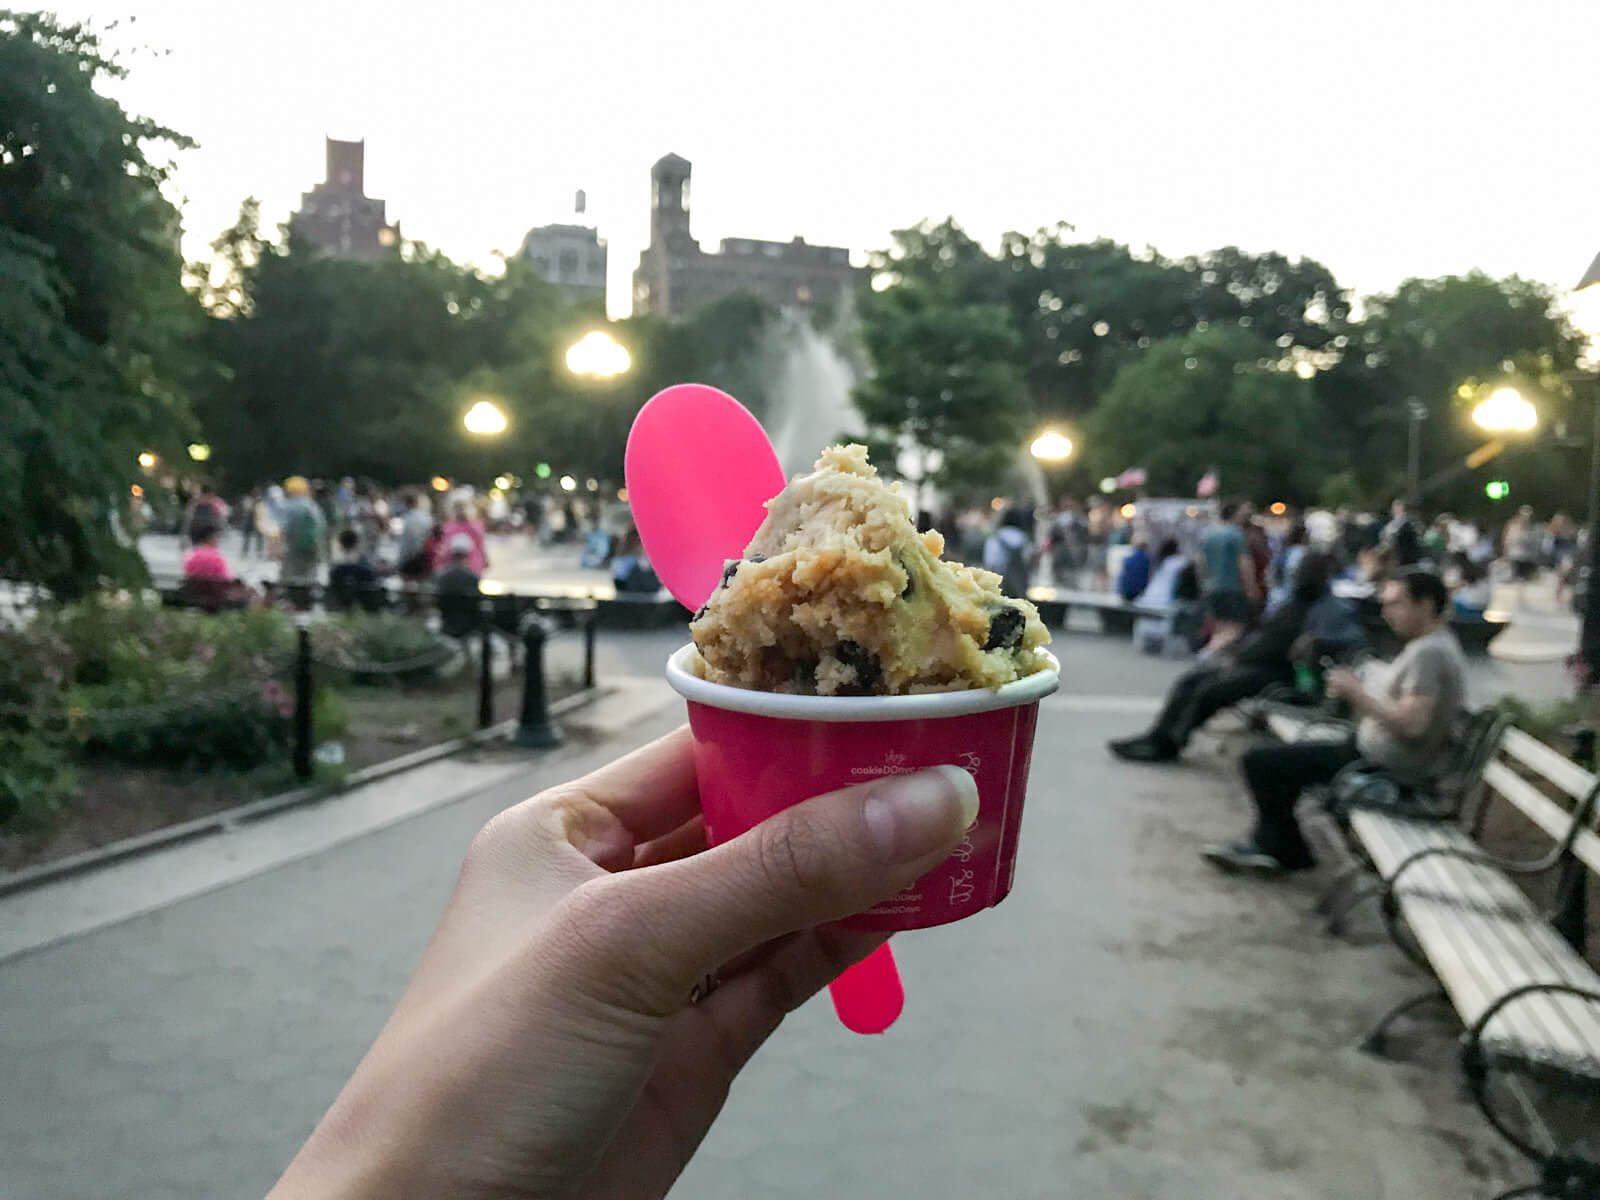 A personâ€™s left hand holding a small pink cup and pink spoon with a cookie dough dessert inside the cup. In the background is a busy park with a water fountain